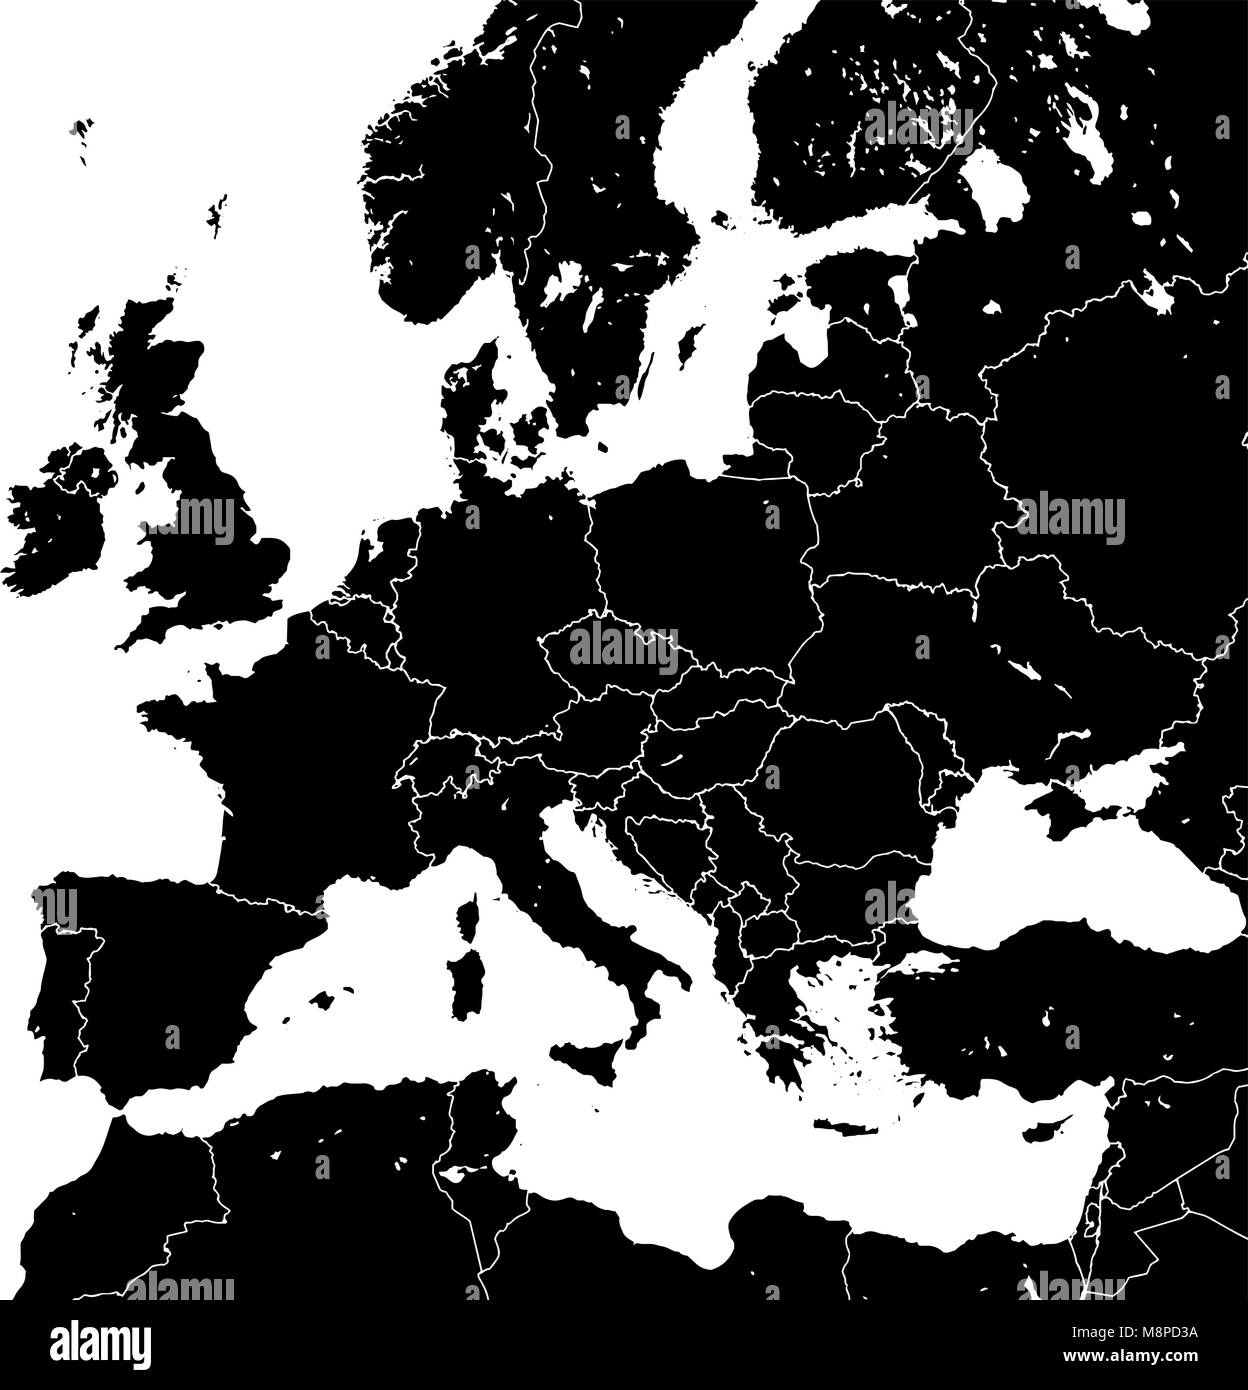 Political Sihouette Map of Central Europe. Black and White Vector Graphic Stock Vector